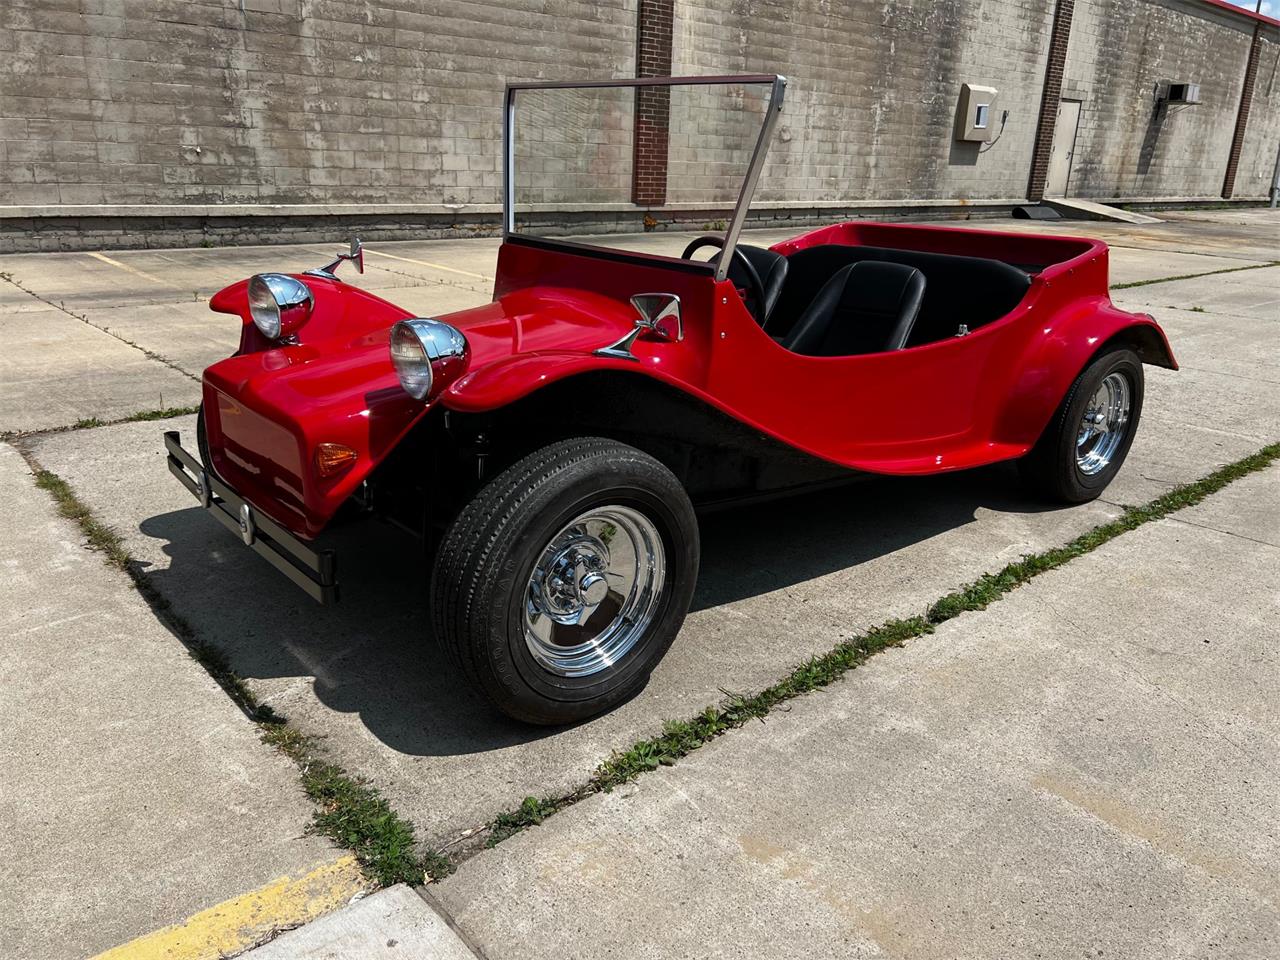 For Sale: 1959 Volkswagen Dune Buggy in Annandale, Minnesota for sale in Annandale, MN